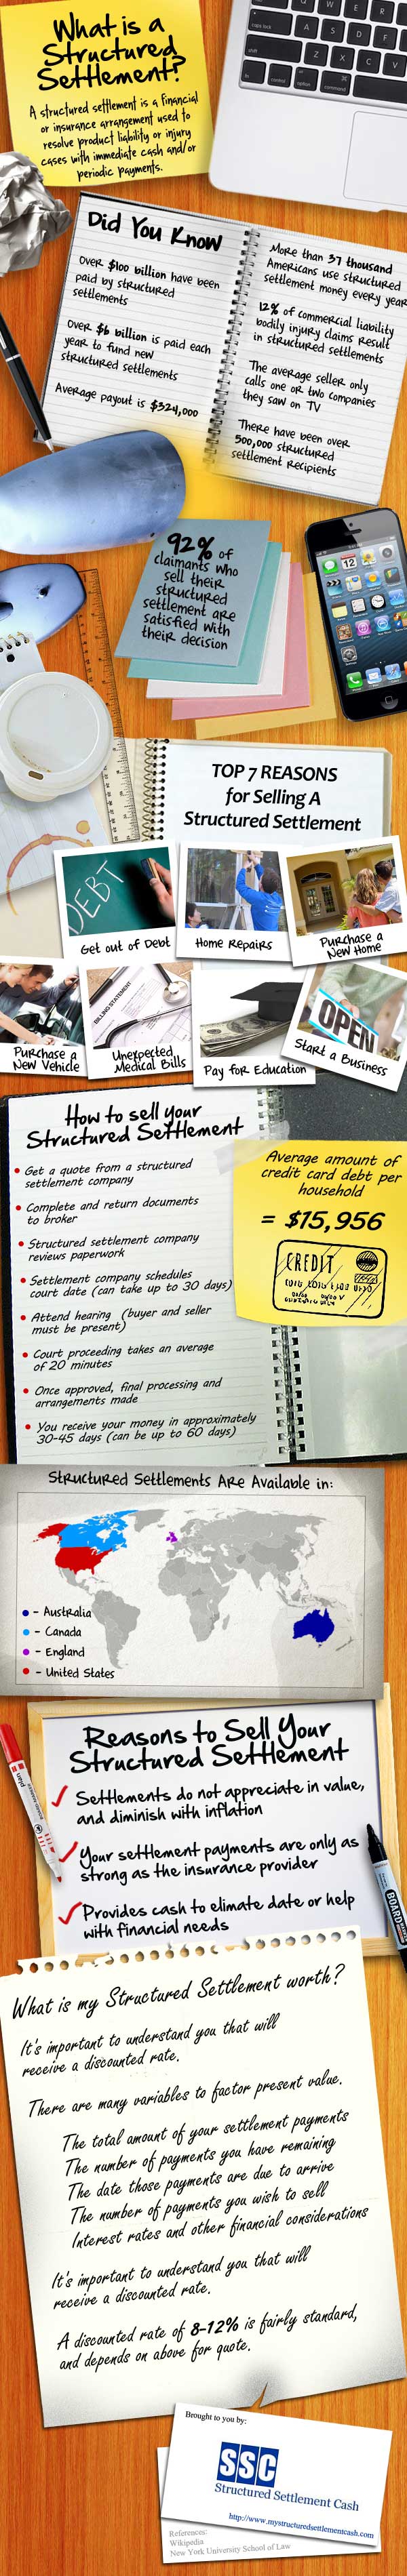 What is a Structured Settlement?